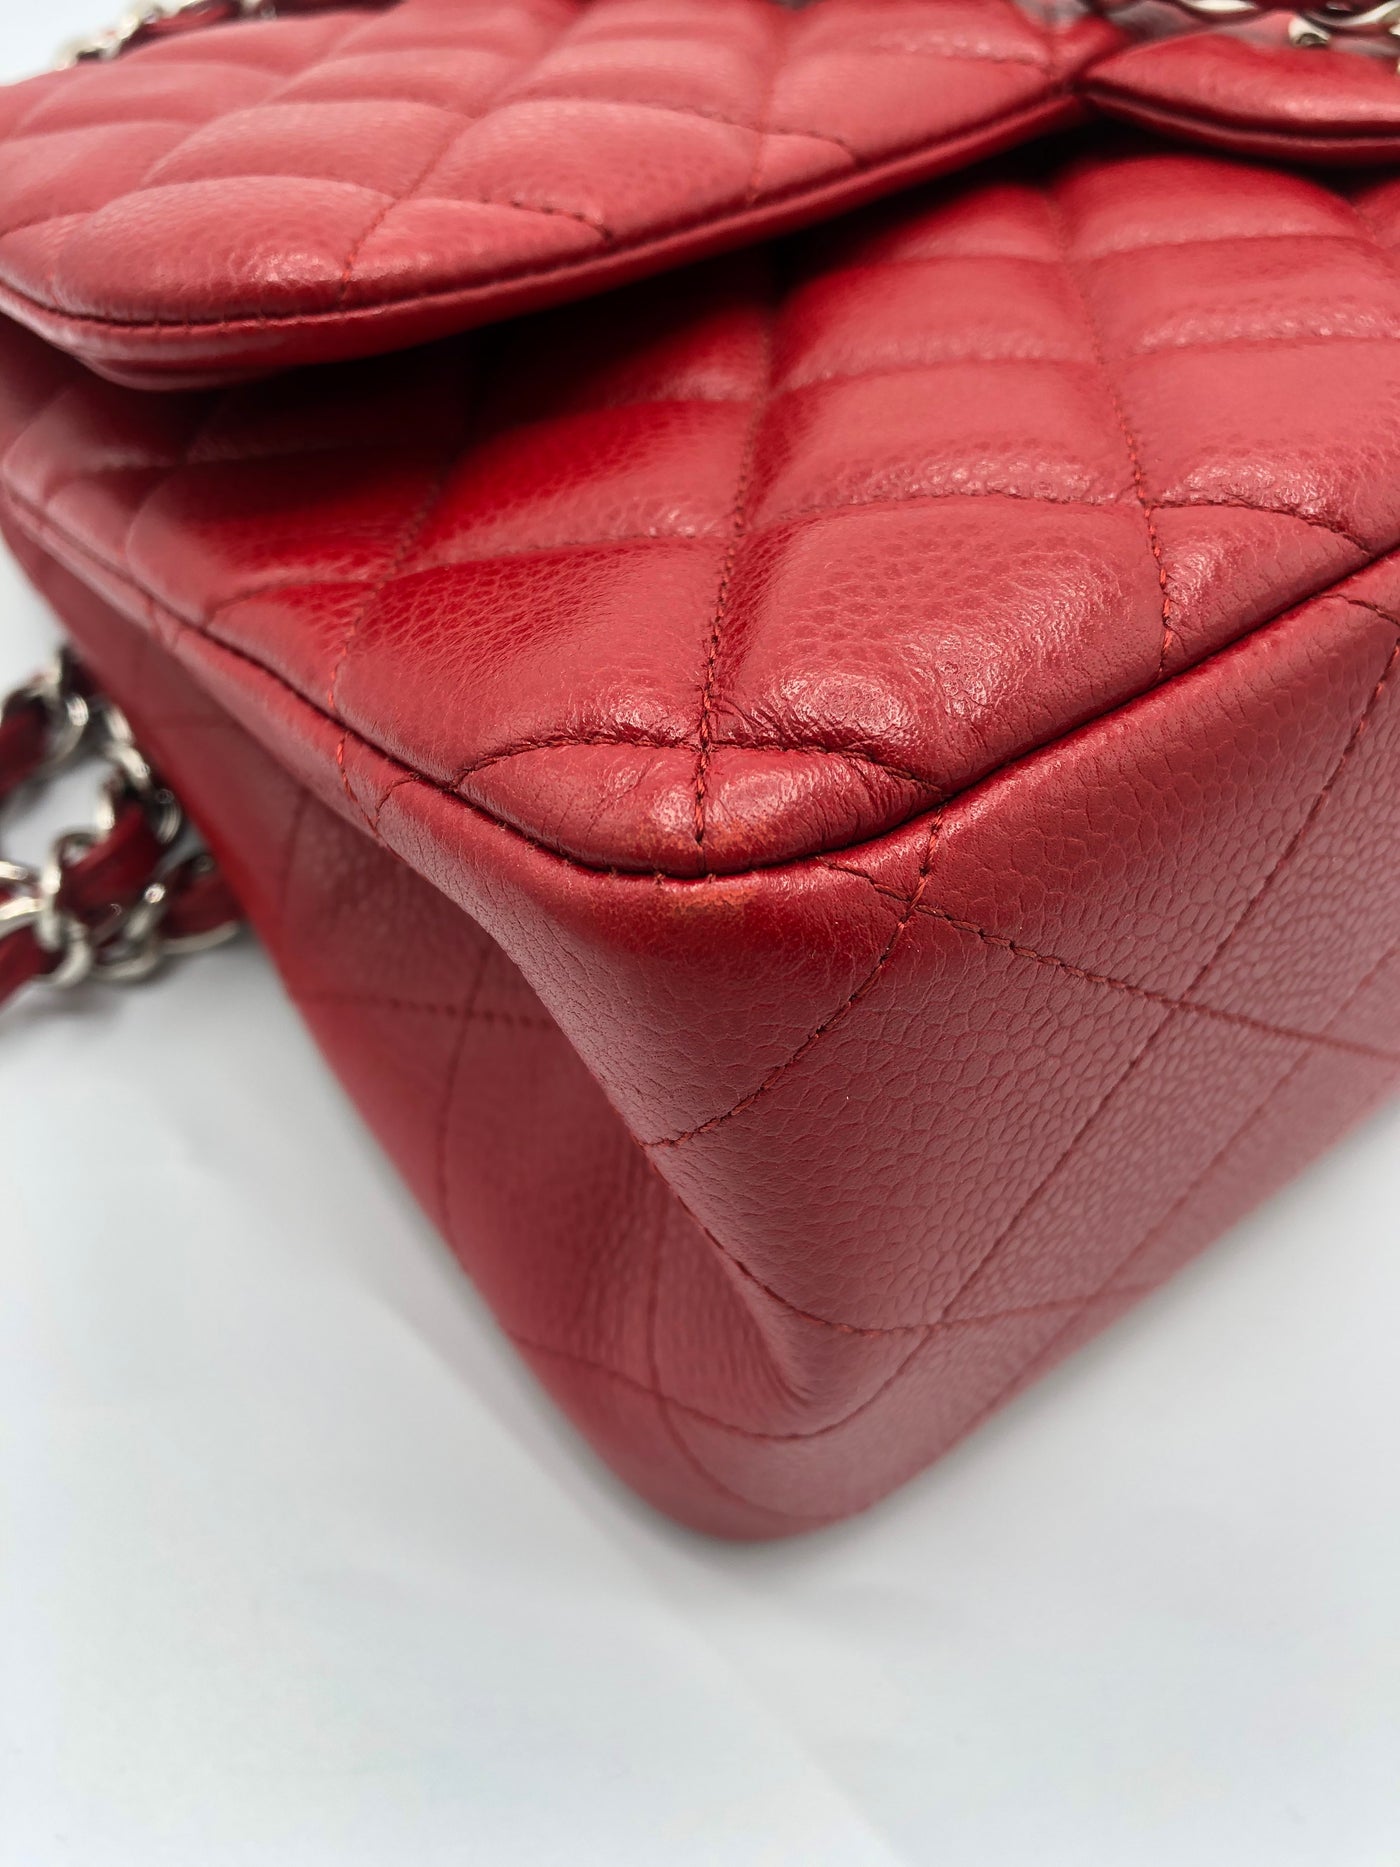 CHANEL Classic Double Flap Jumbo Caviar Red Handbag with silver hardware RRP: £8140